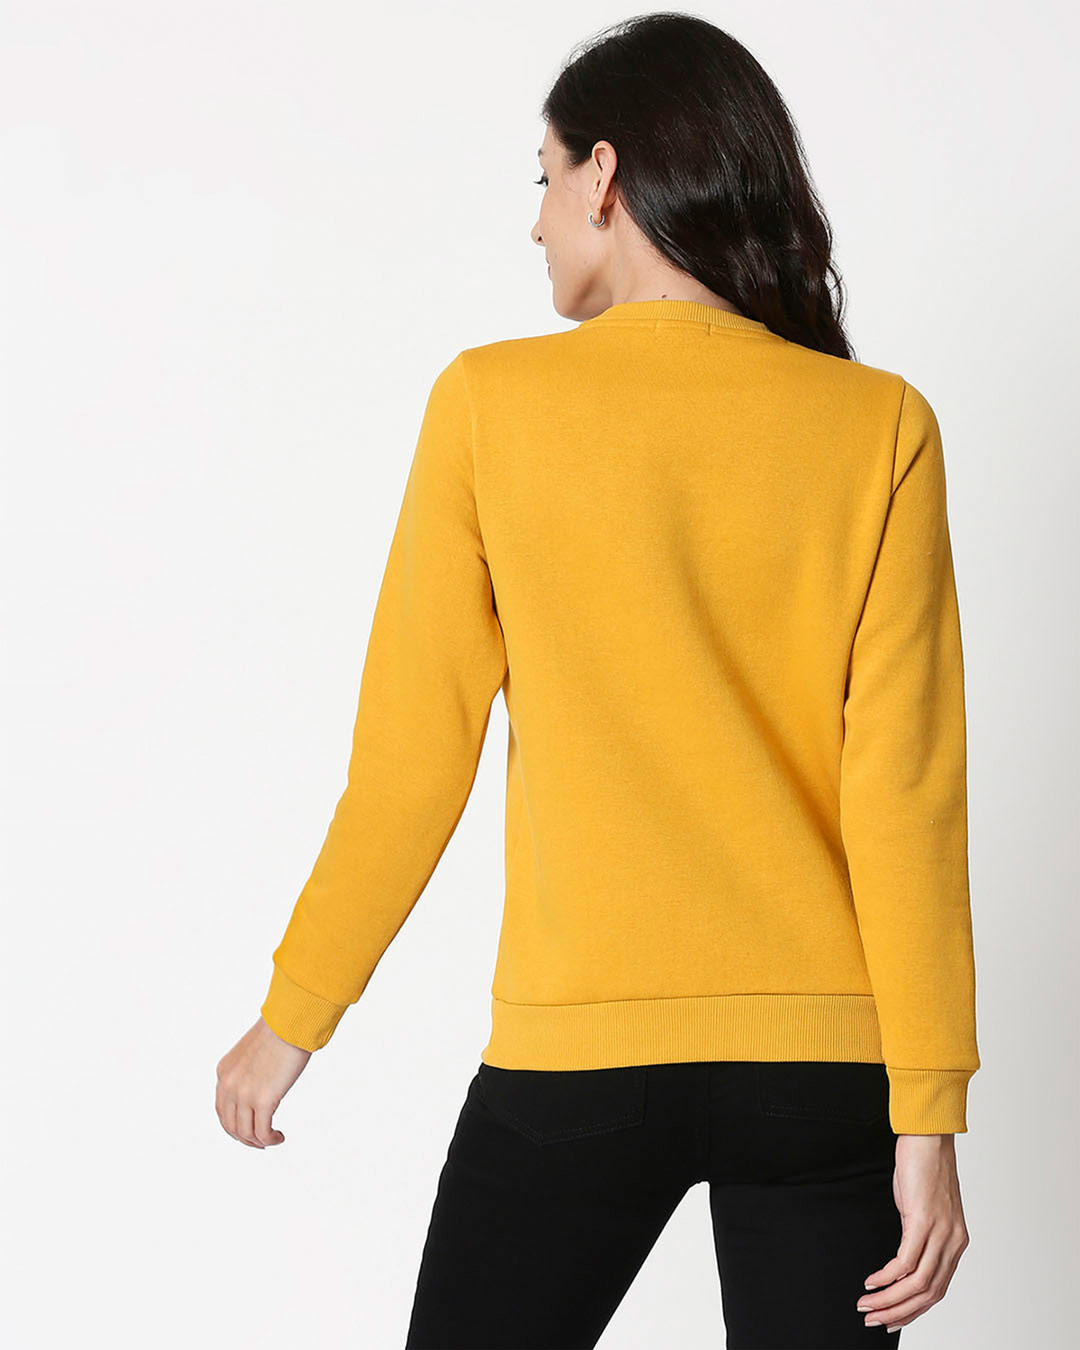 Shop Women's Yellow One Chance Typography Sweater-Back